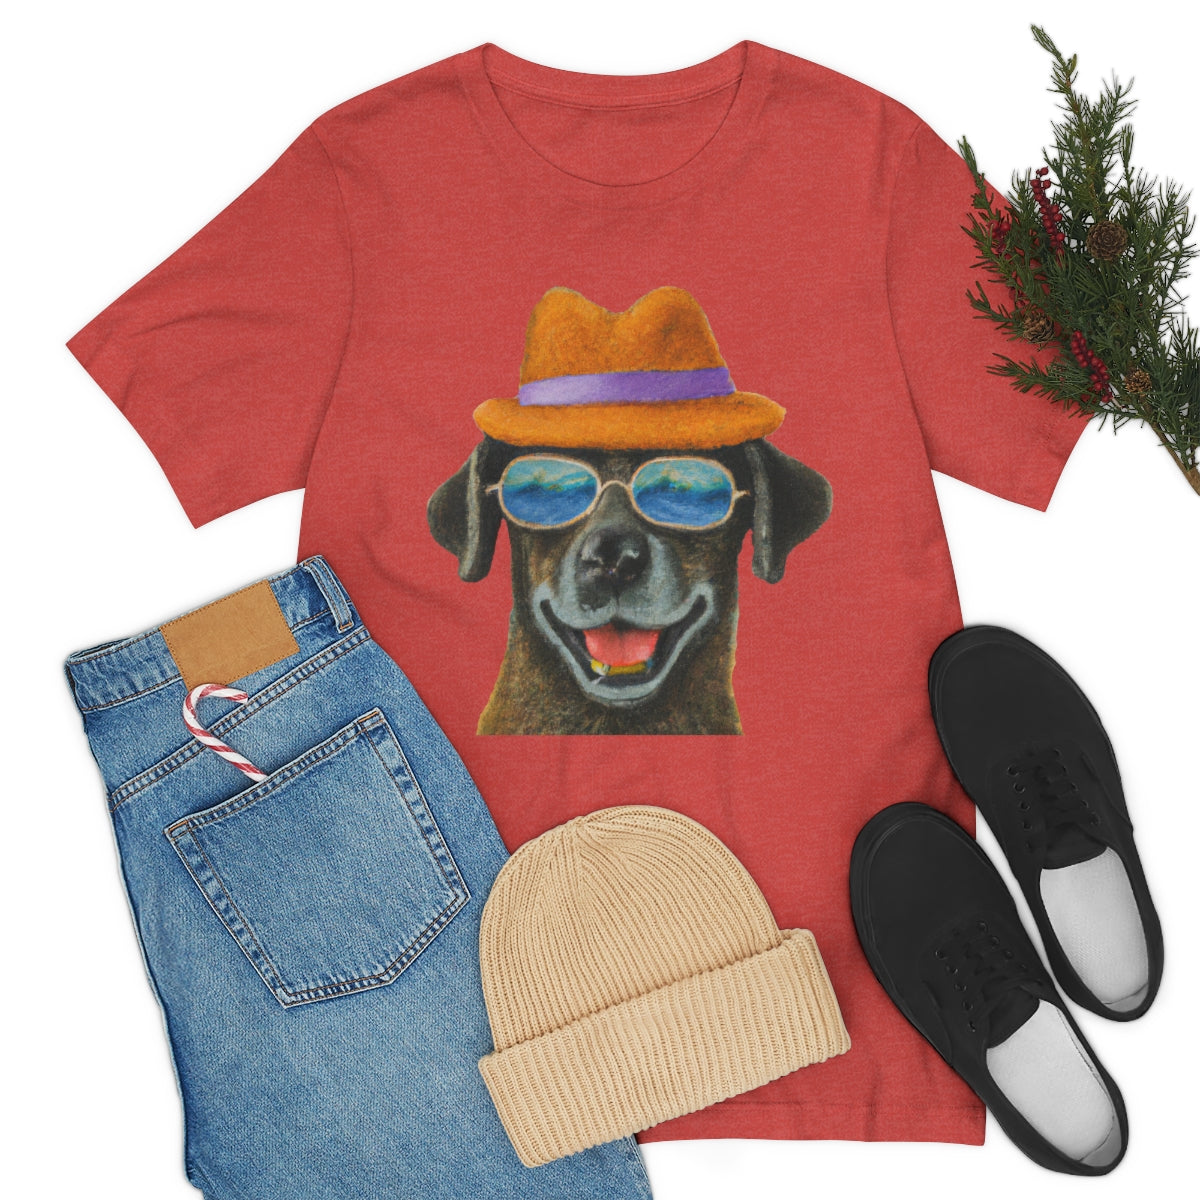 Dog at the beach wearing a hat and sunglasses arts T-shirt for women